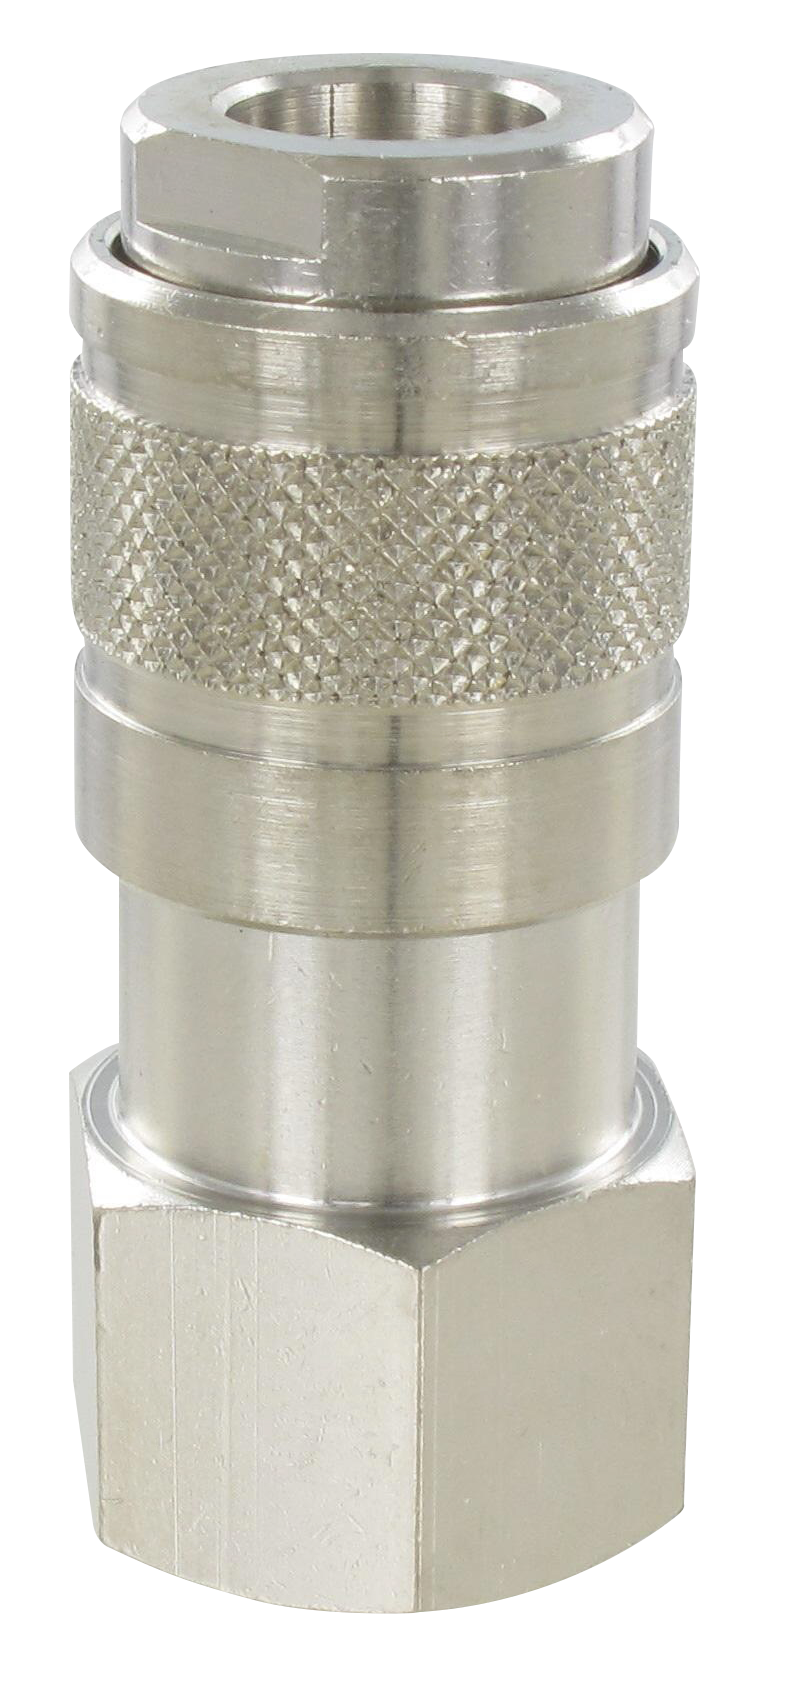 Quick-connect couplings, US-MIL standard ISO 6150 B-12 FEMALE SOCKET Fittings and quick-connect couplings